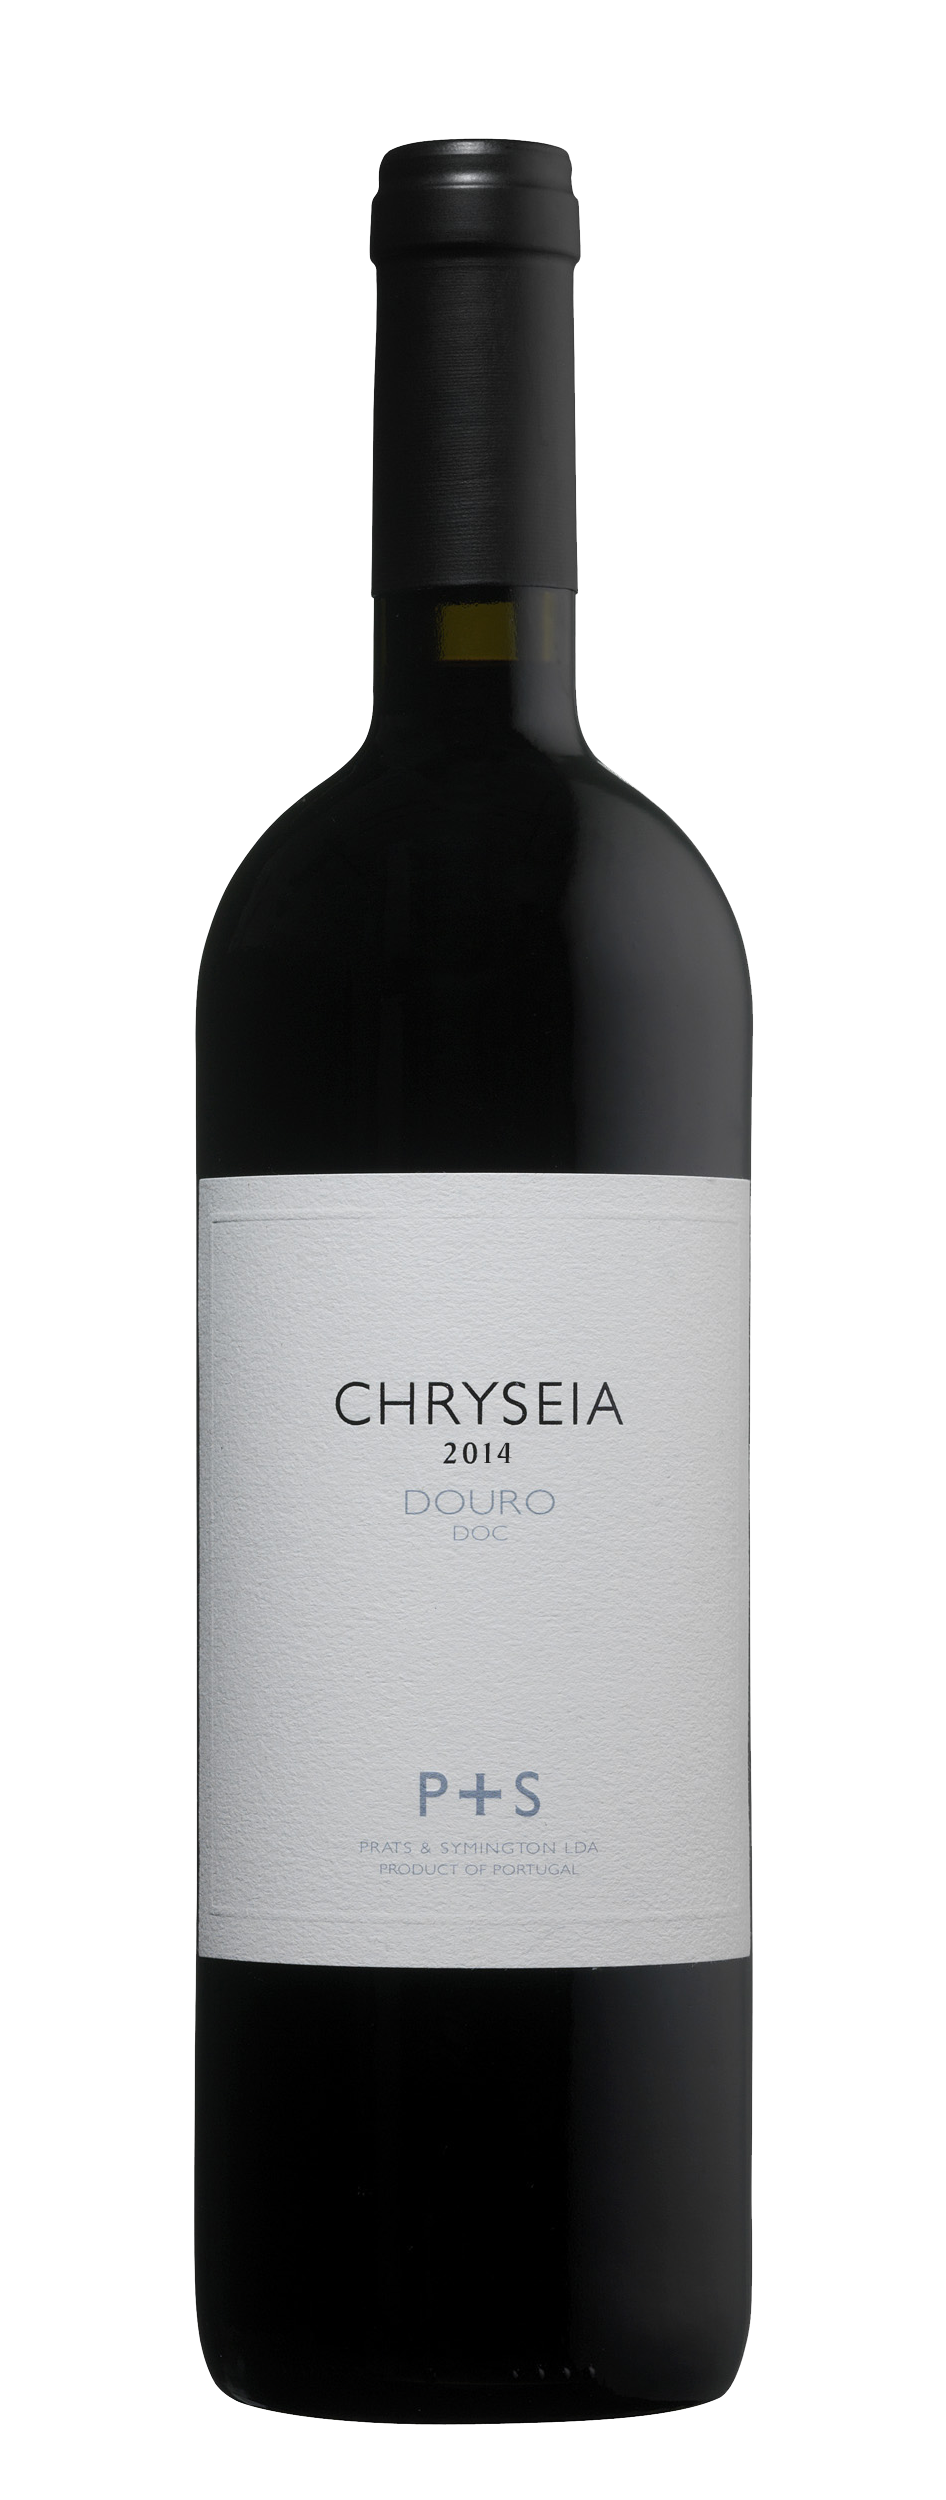 Product Image for P&S CHRYSEIA DOURO RED 2014 - MAGNUM